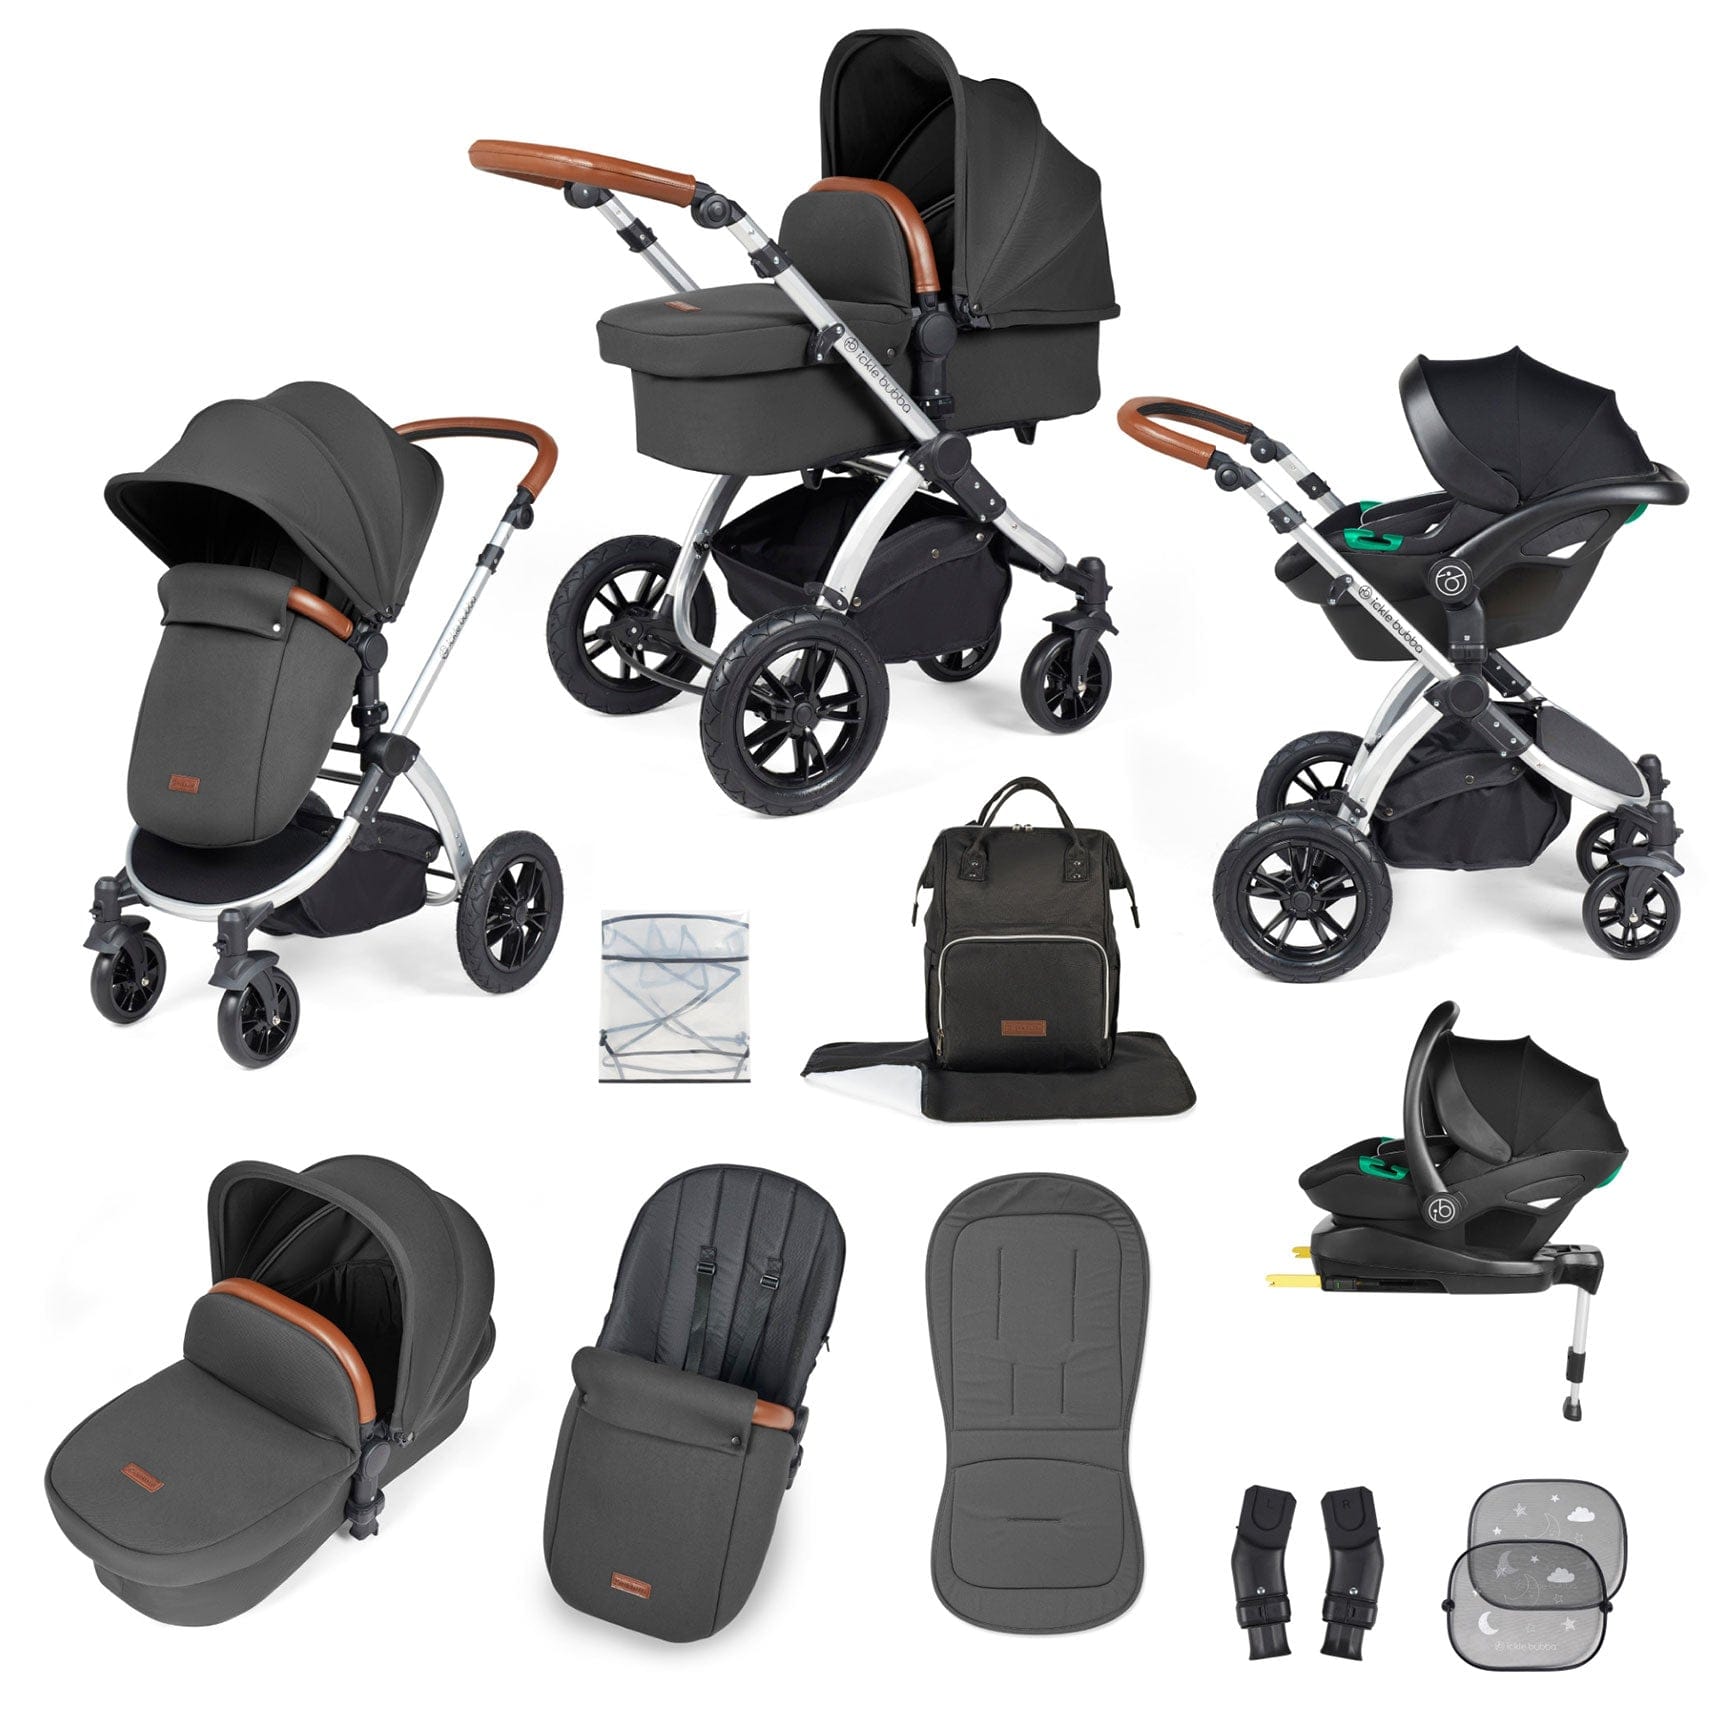 Ickle Bubba travel systems Ickle Bubba Stomp Luxe All-in-One Travel System with Isofix Base - Silver/Charcoal Grey/Tan 10-011-300-255